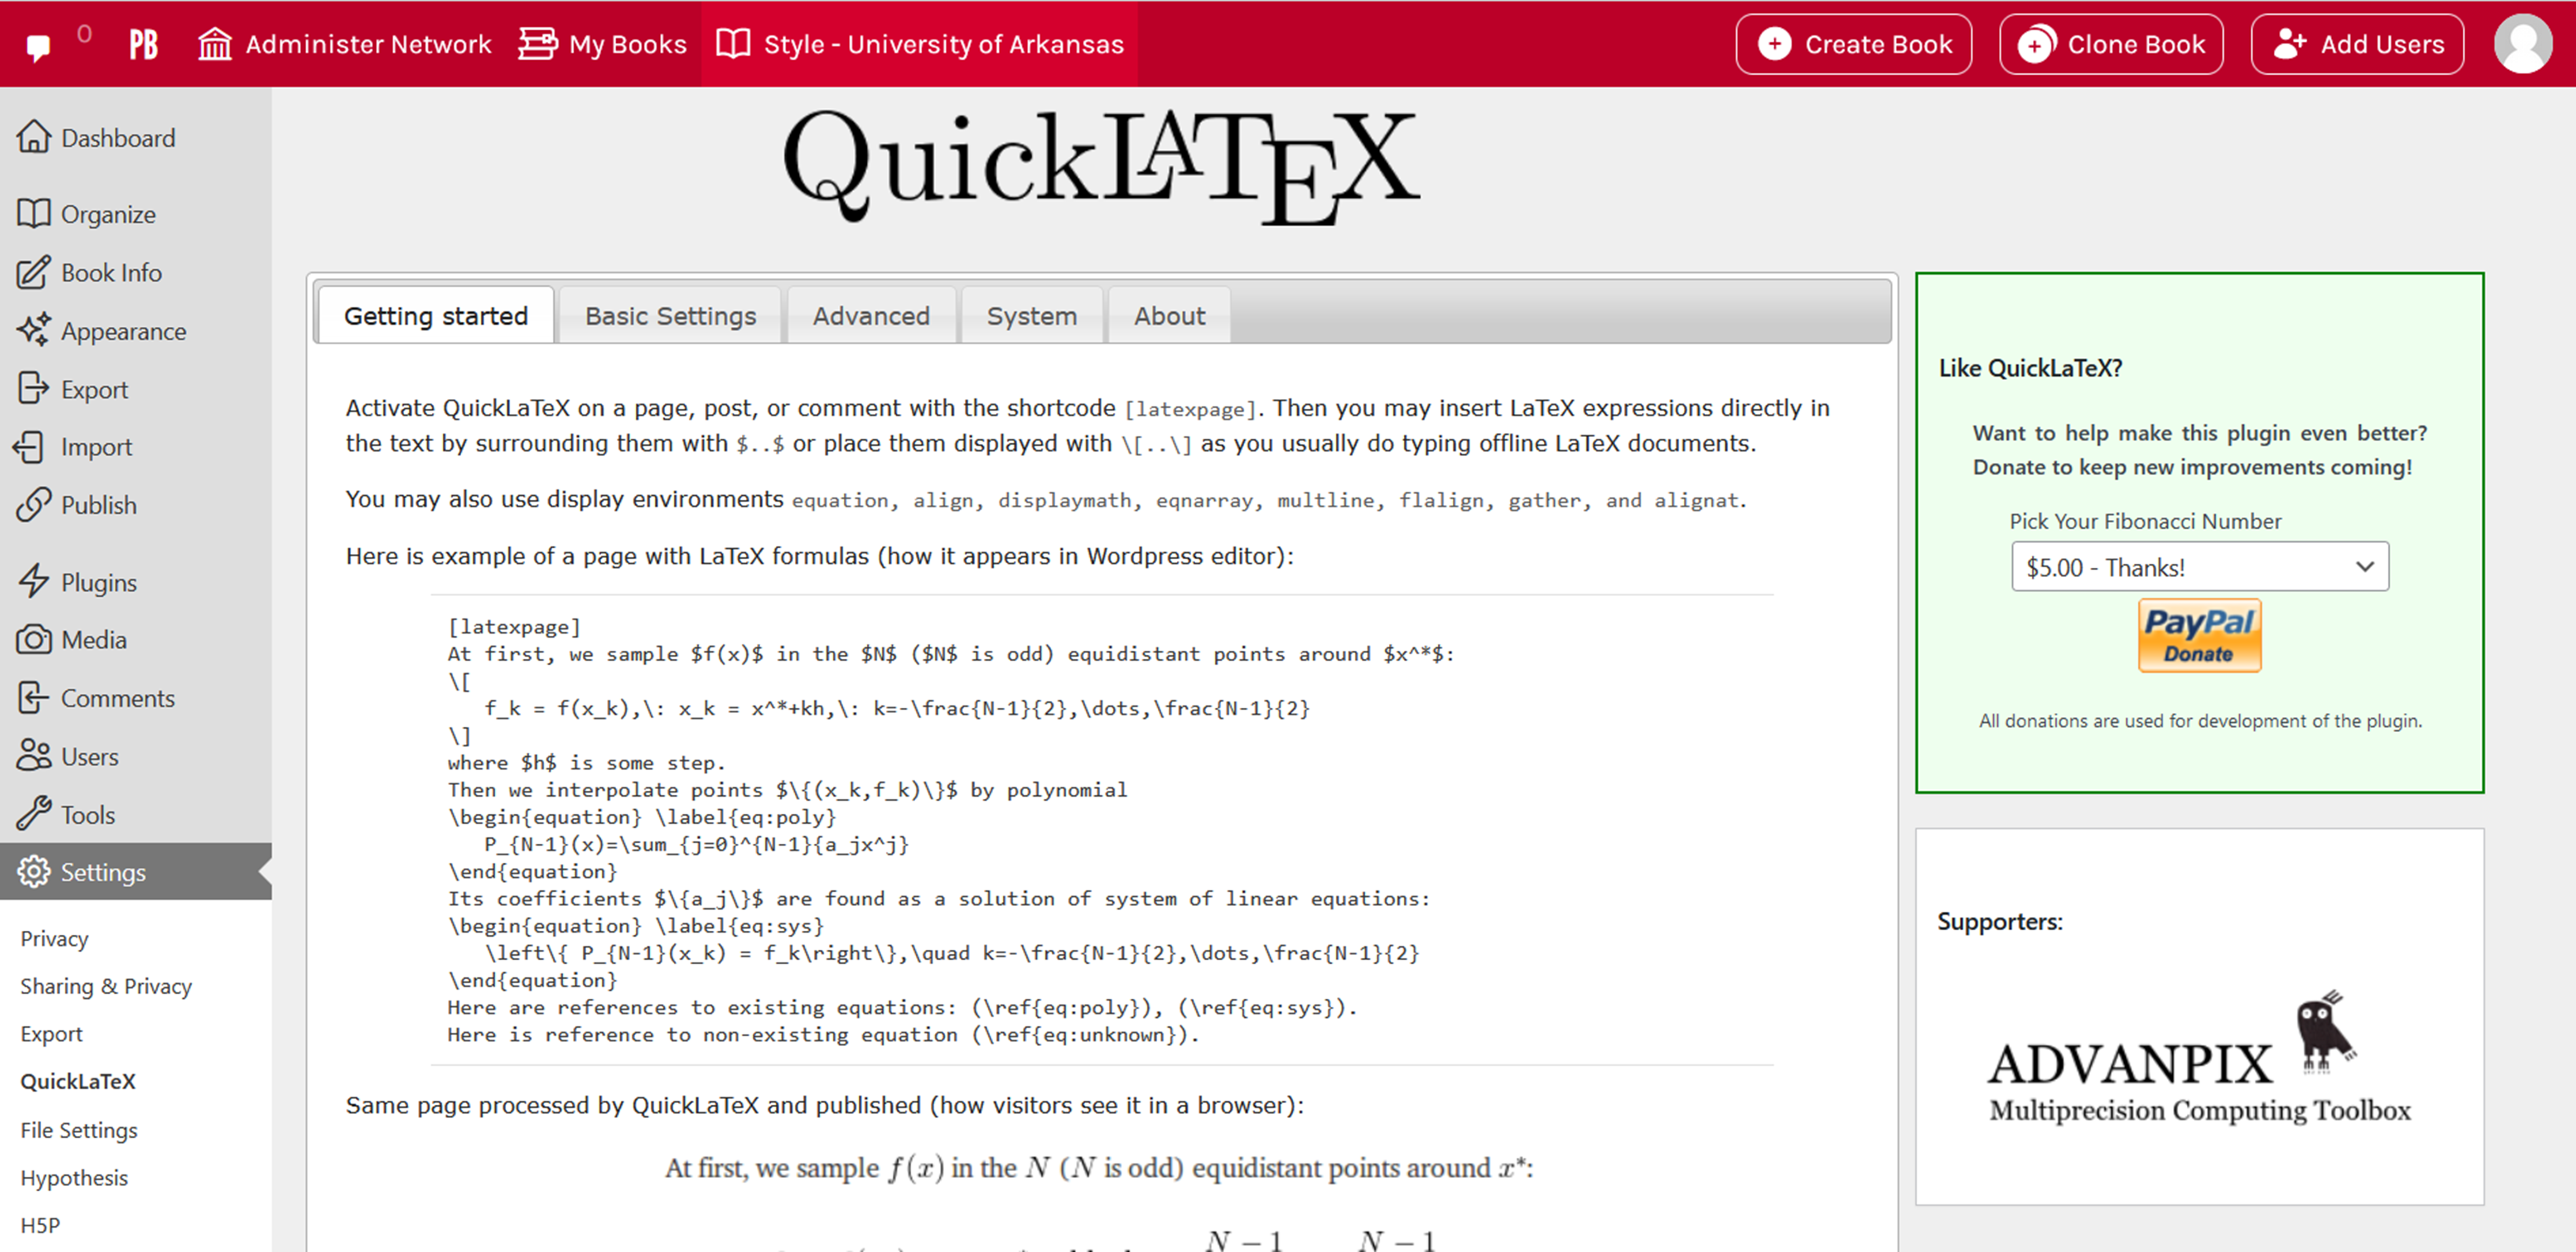 The QuickLaTeX page from the Settings page